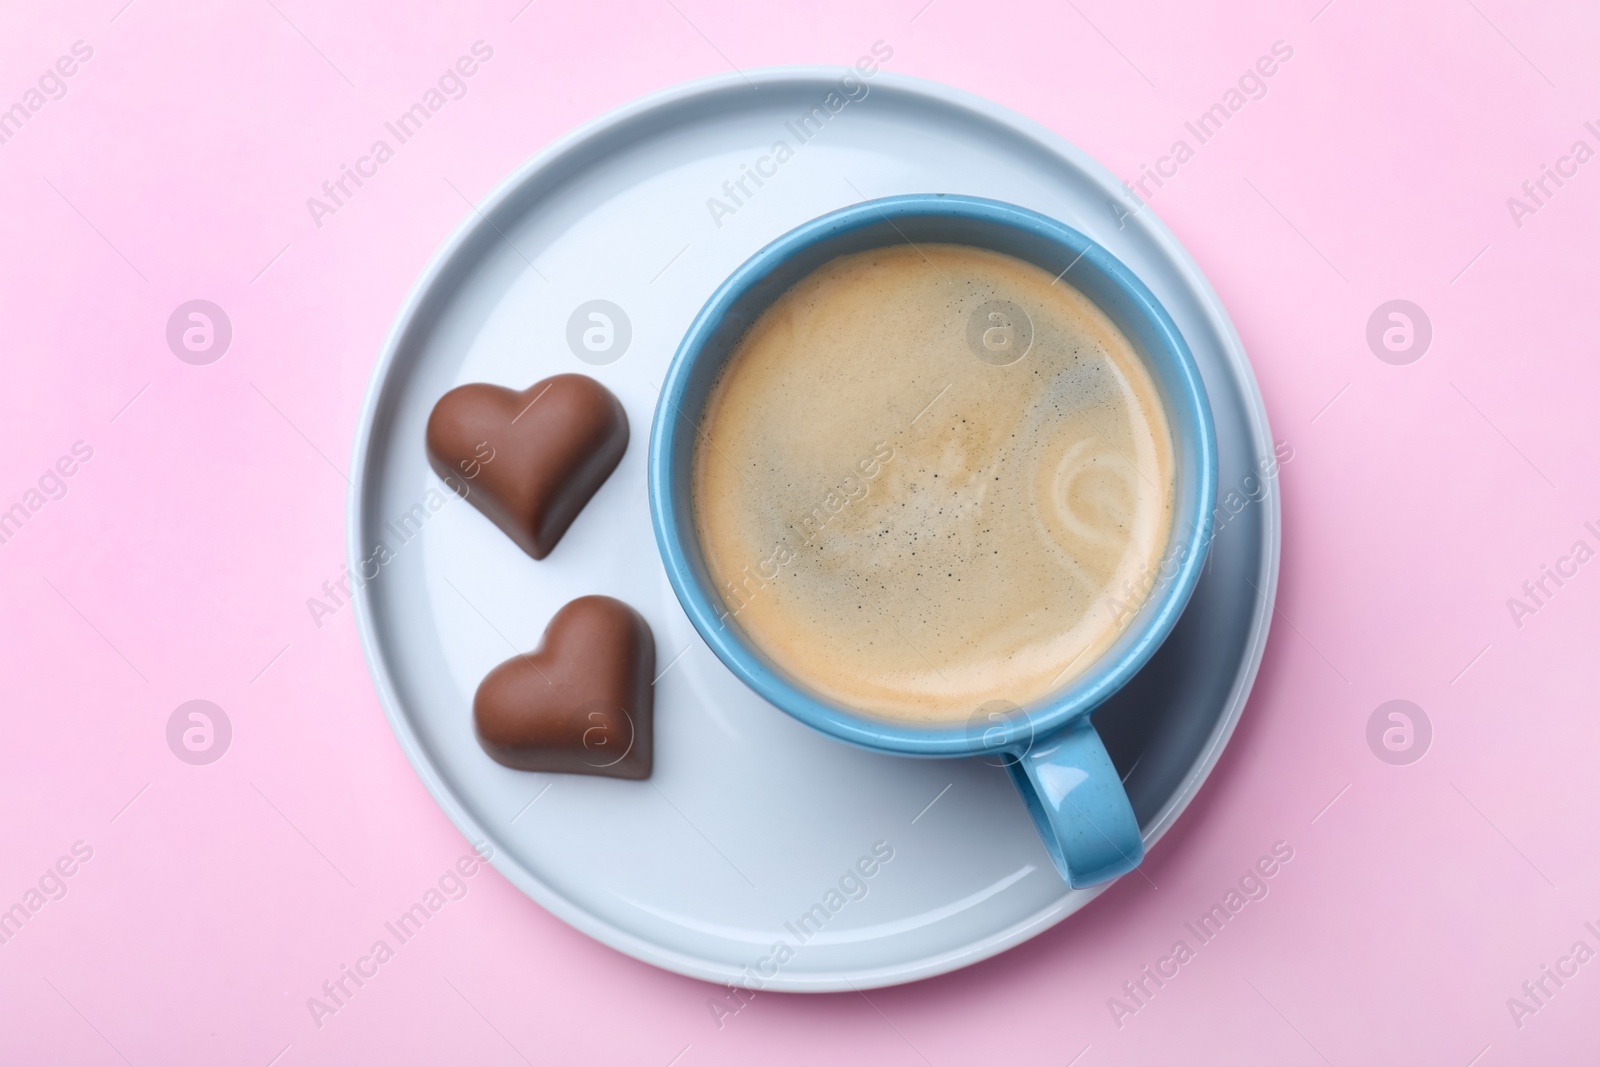 Photo of Romantic breakfast with cup of coffee and chocolate candies on pink background, top view. Valentine's day celebration